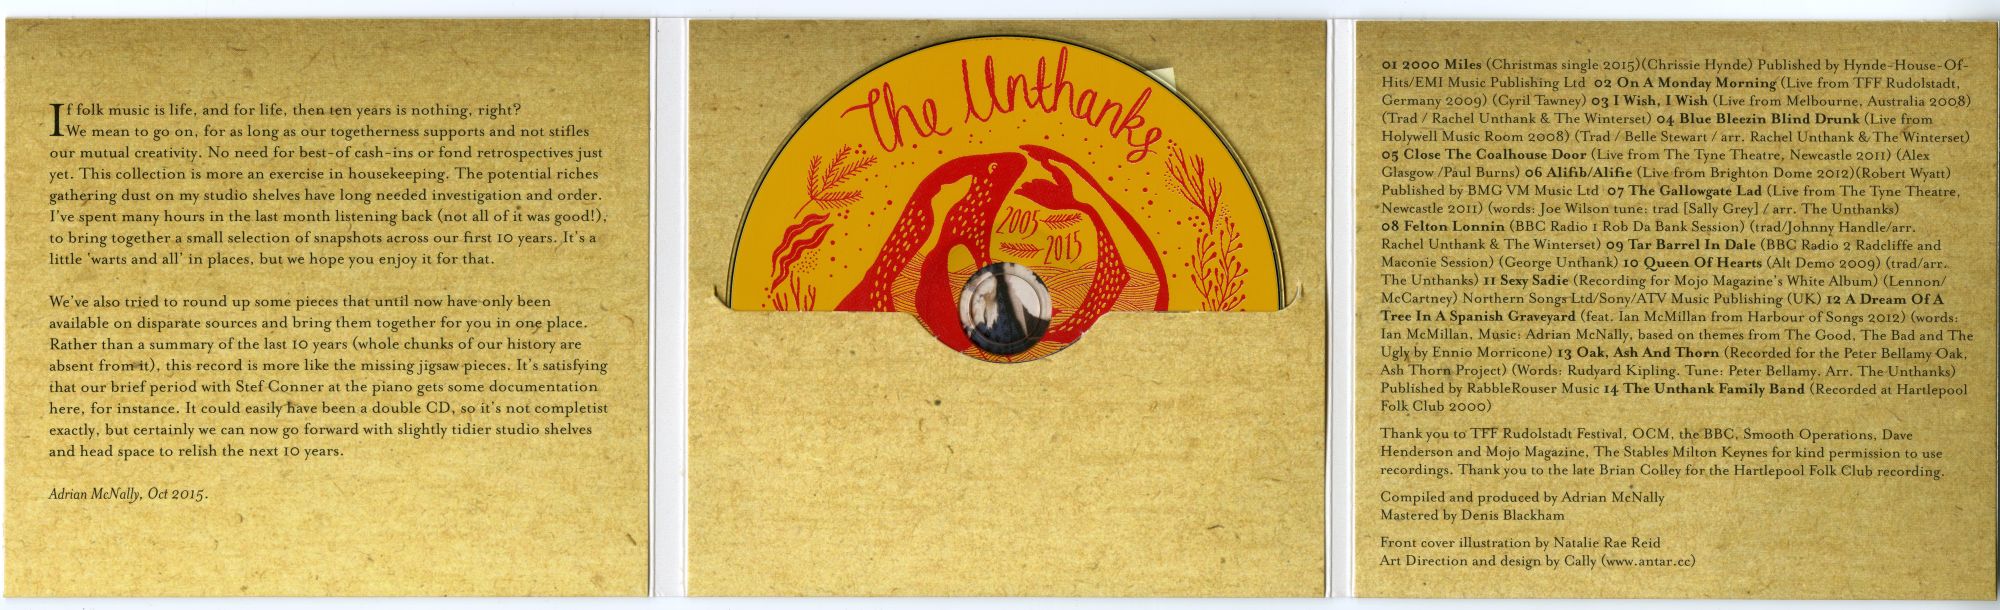 The Unthanks『Memory Box - Archive Treasures (2005 - 2015)』02